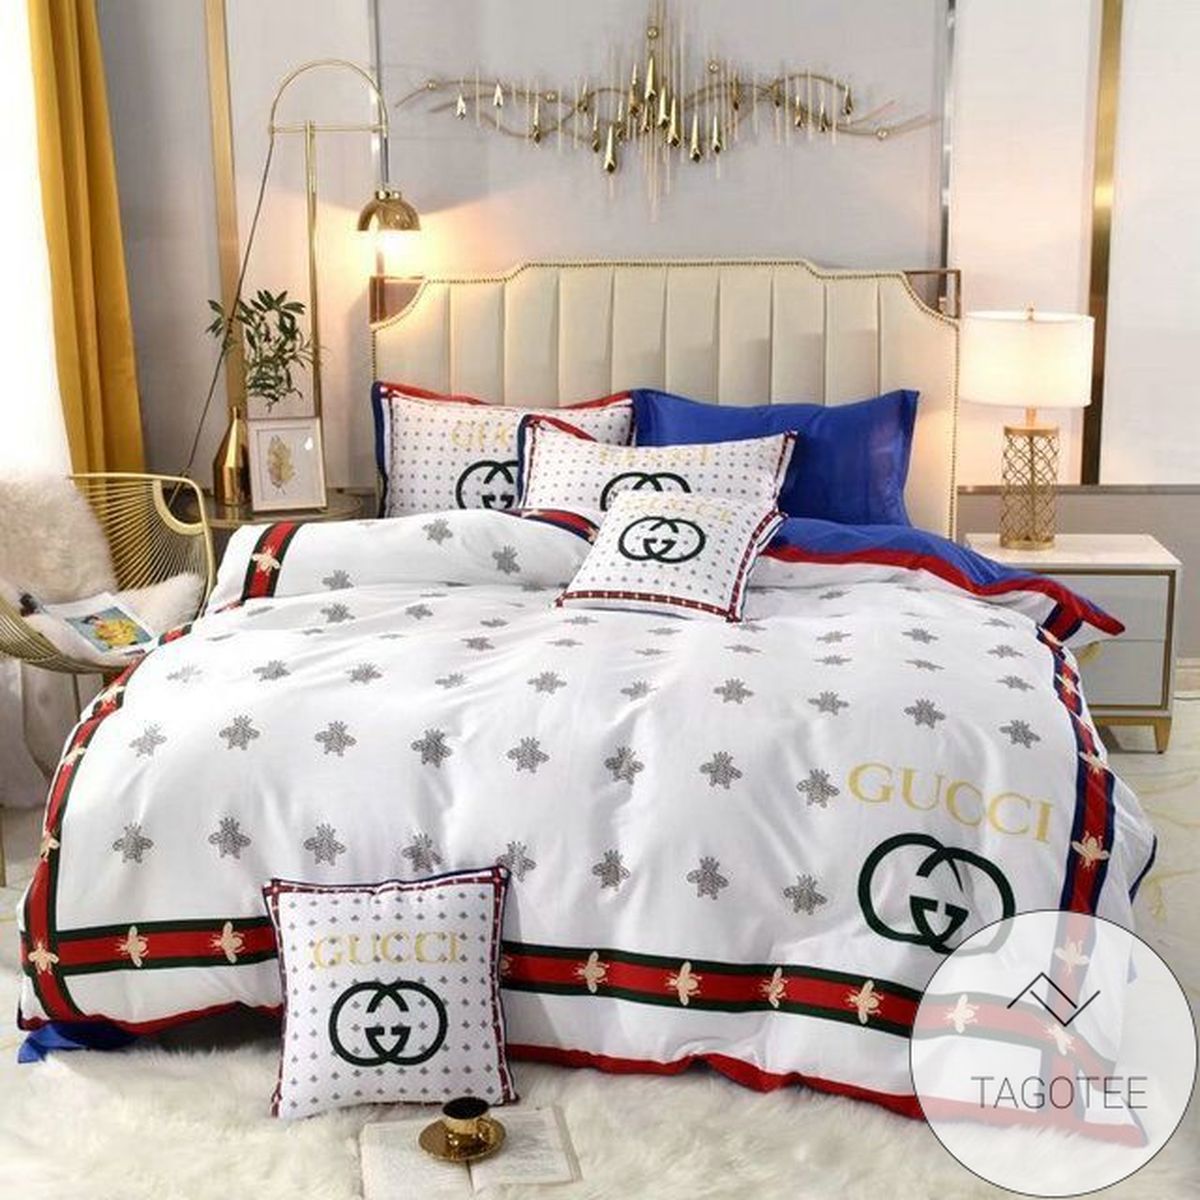 Gucci Bee White Red Style 2 Bedding Sets Duvet Cover Sheet Cover Pillow Cases Luxury Bedroom Sets 2022